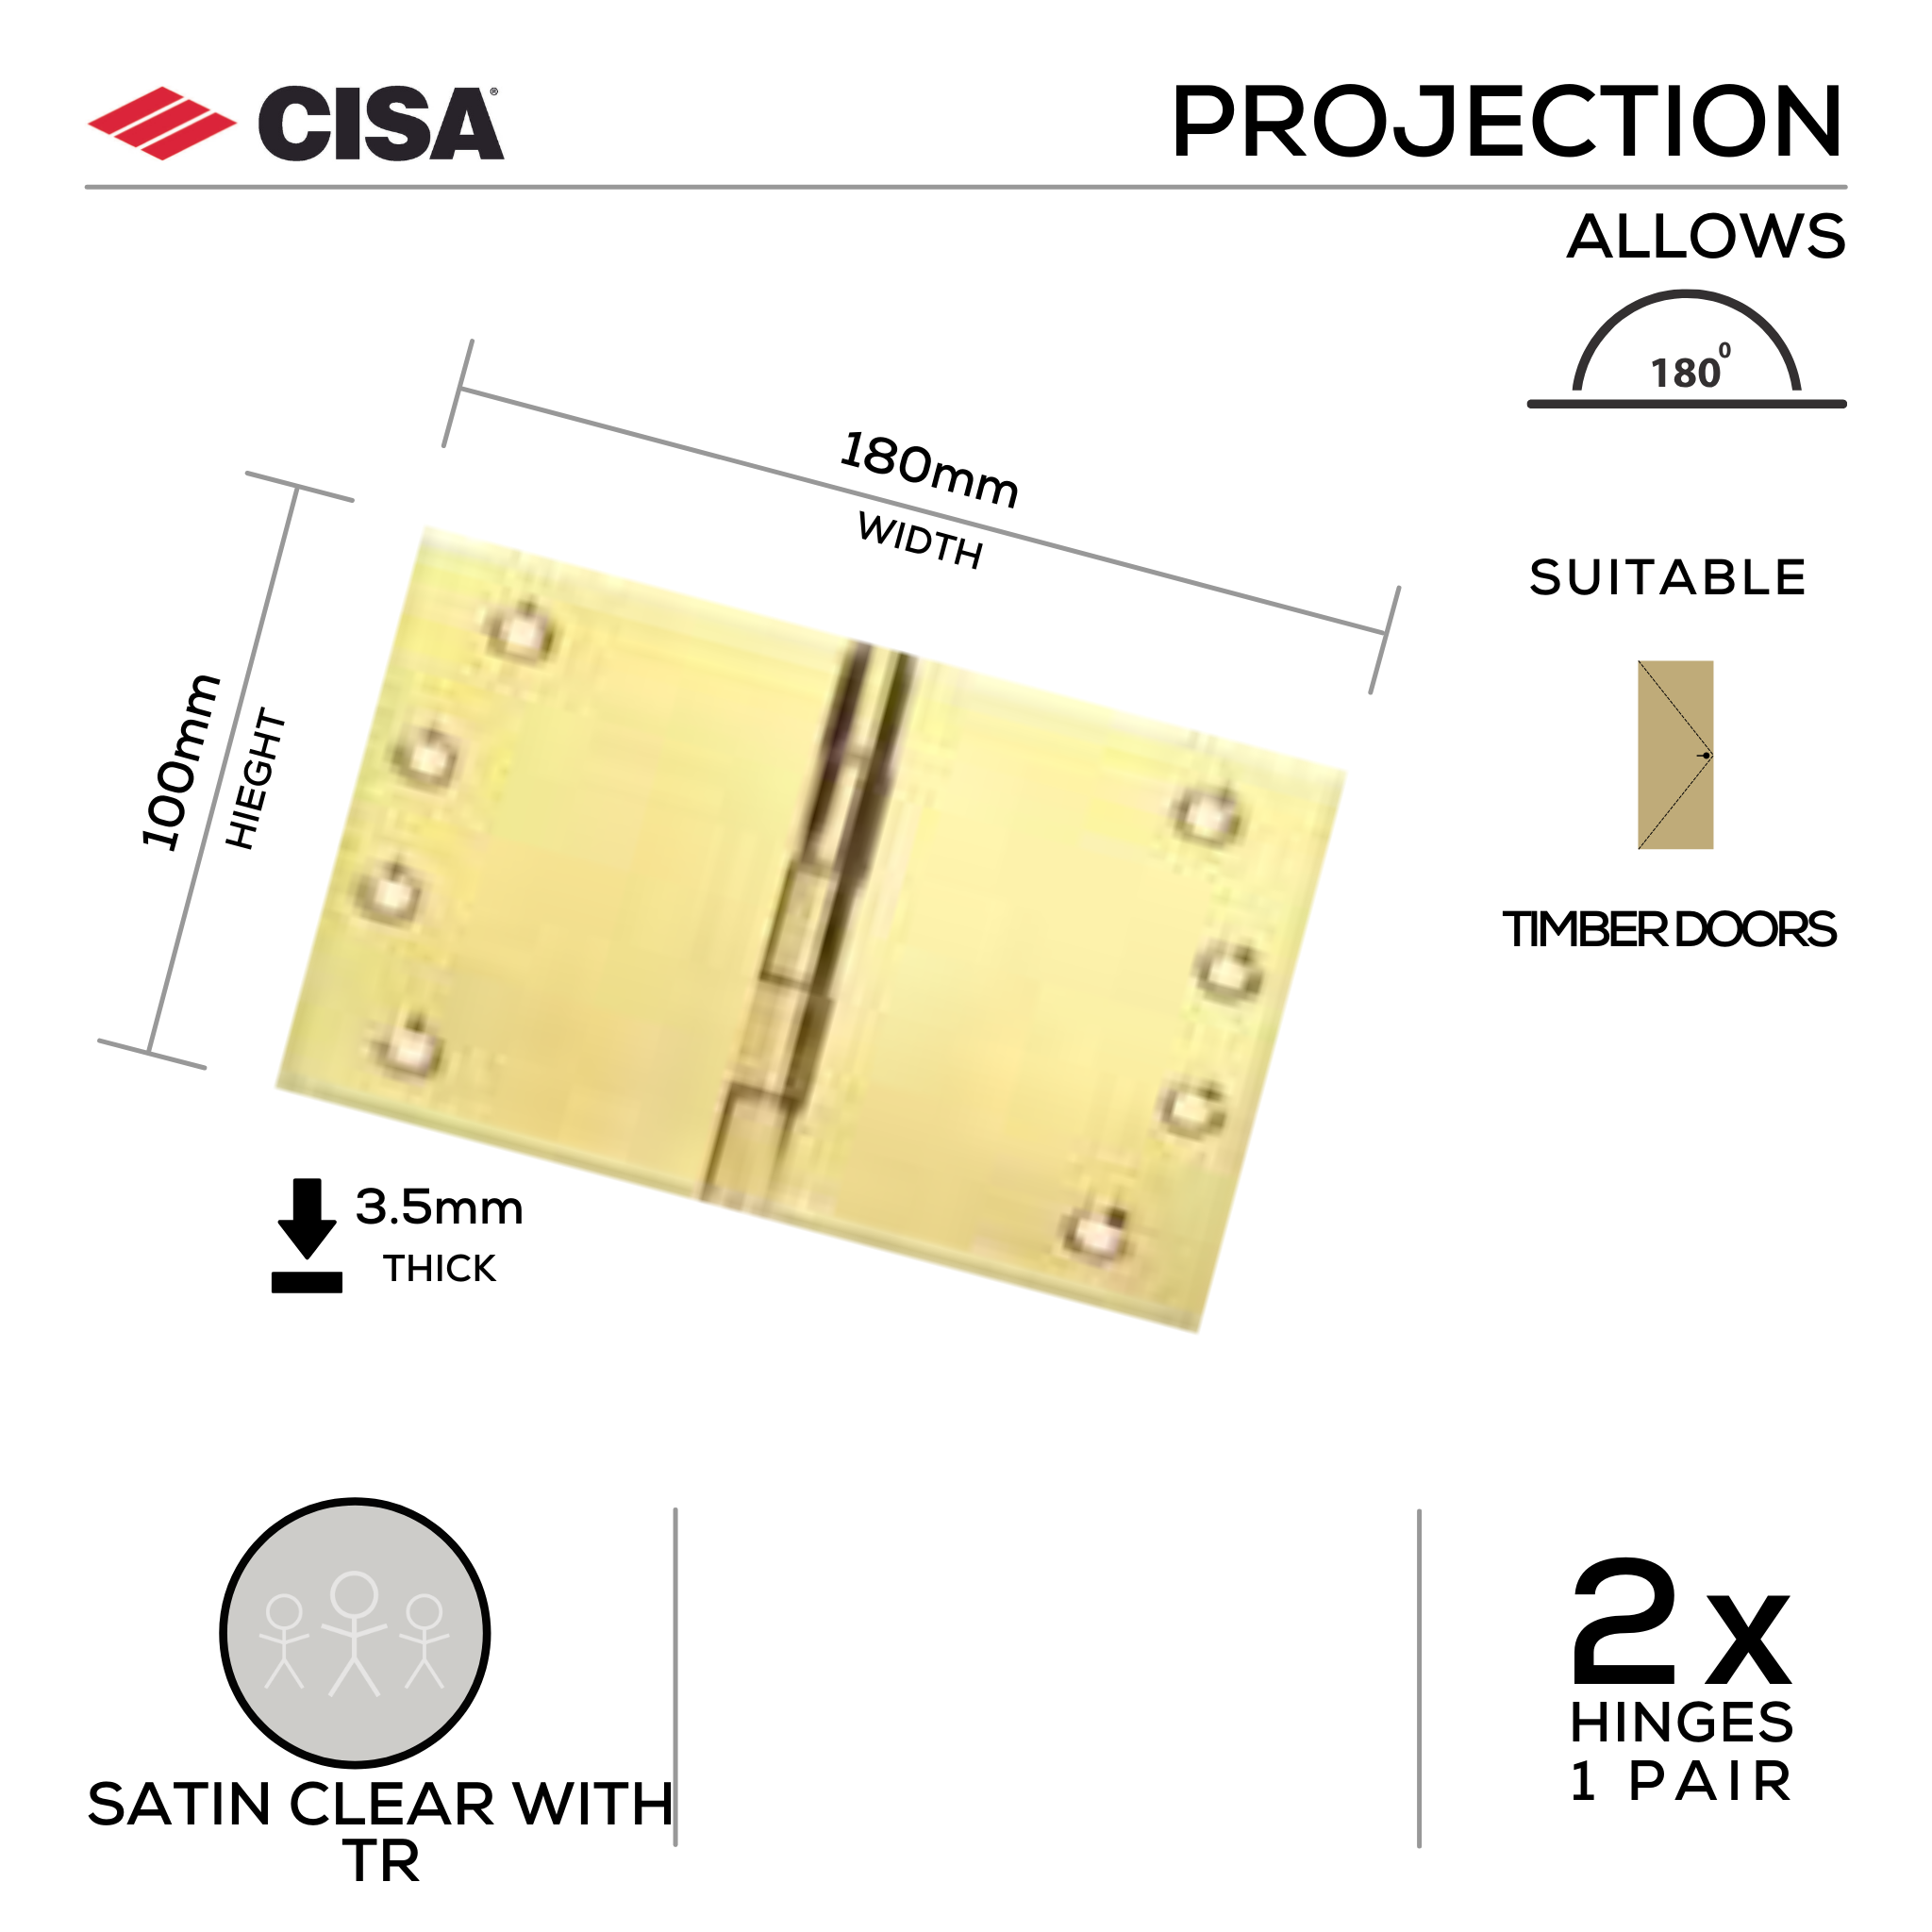 FH180X3-TR, Projection Hinge, 2 x Hinges (1 Pair), 100mm (h) x 180mm (w) x 3.5mm (t), Satin with Tarnish Resistant, CISA